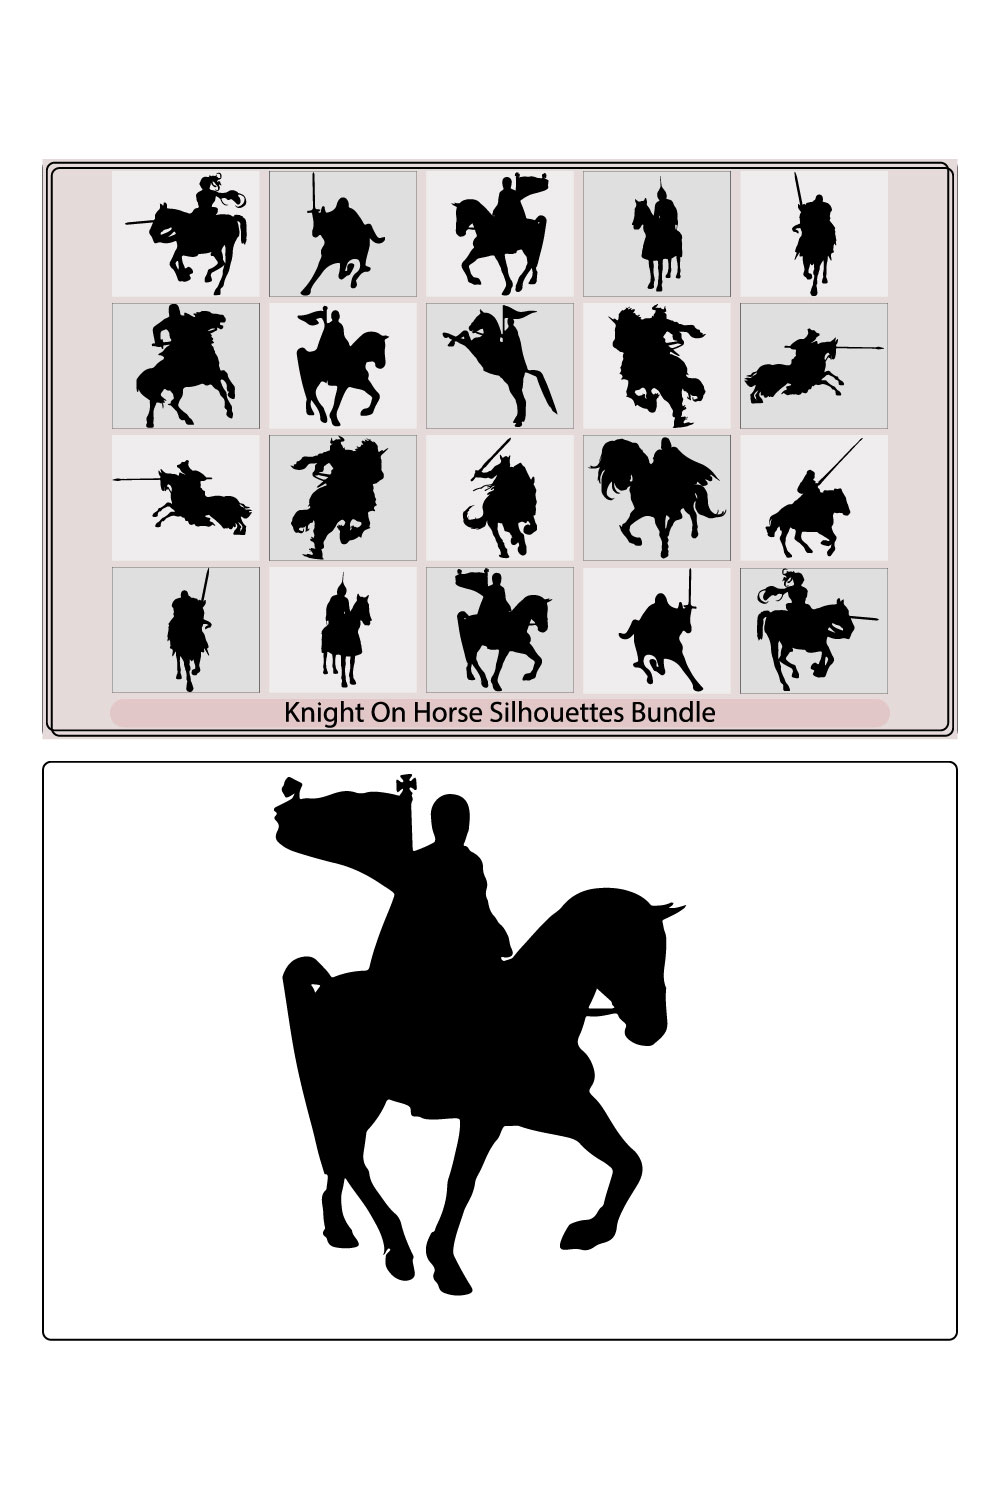 Black silhouette of knight on white background Detailed image of rider with spear and armor,royal knight with sword and shield riding a horse pinterest preview image.